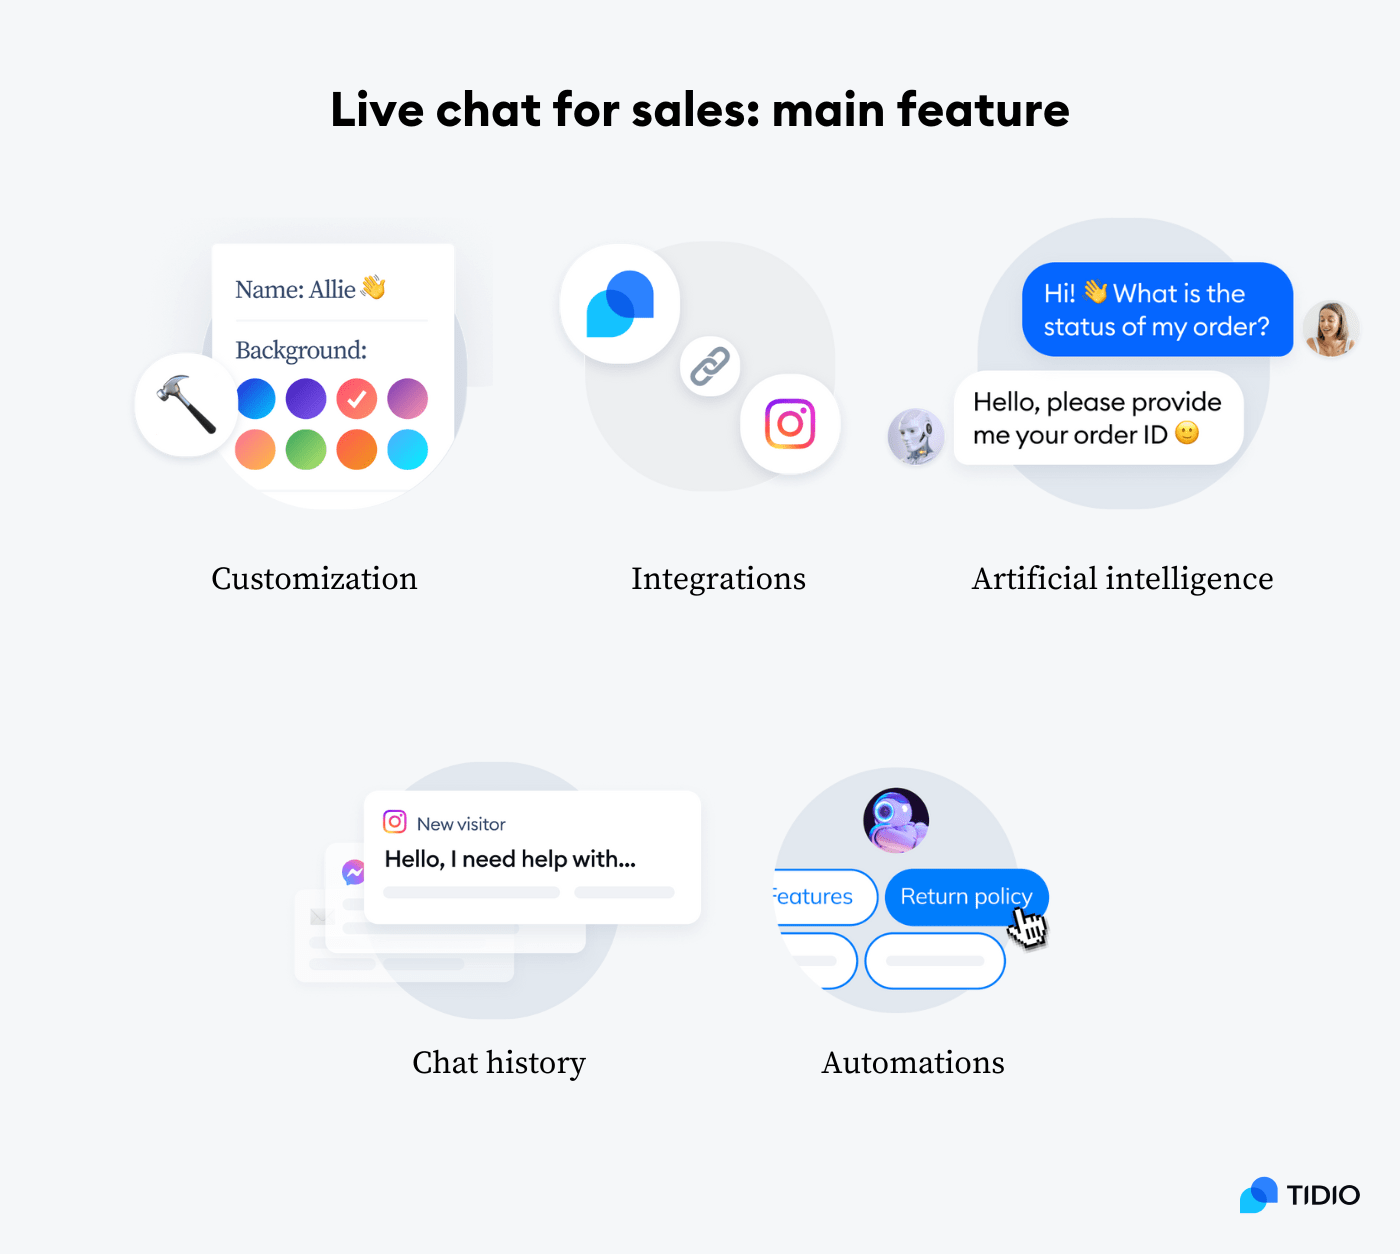 Live chat for sales: main features